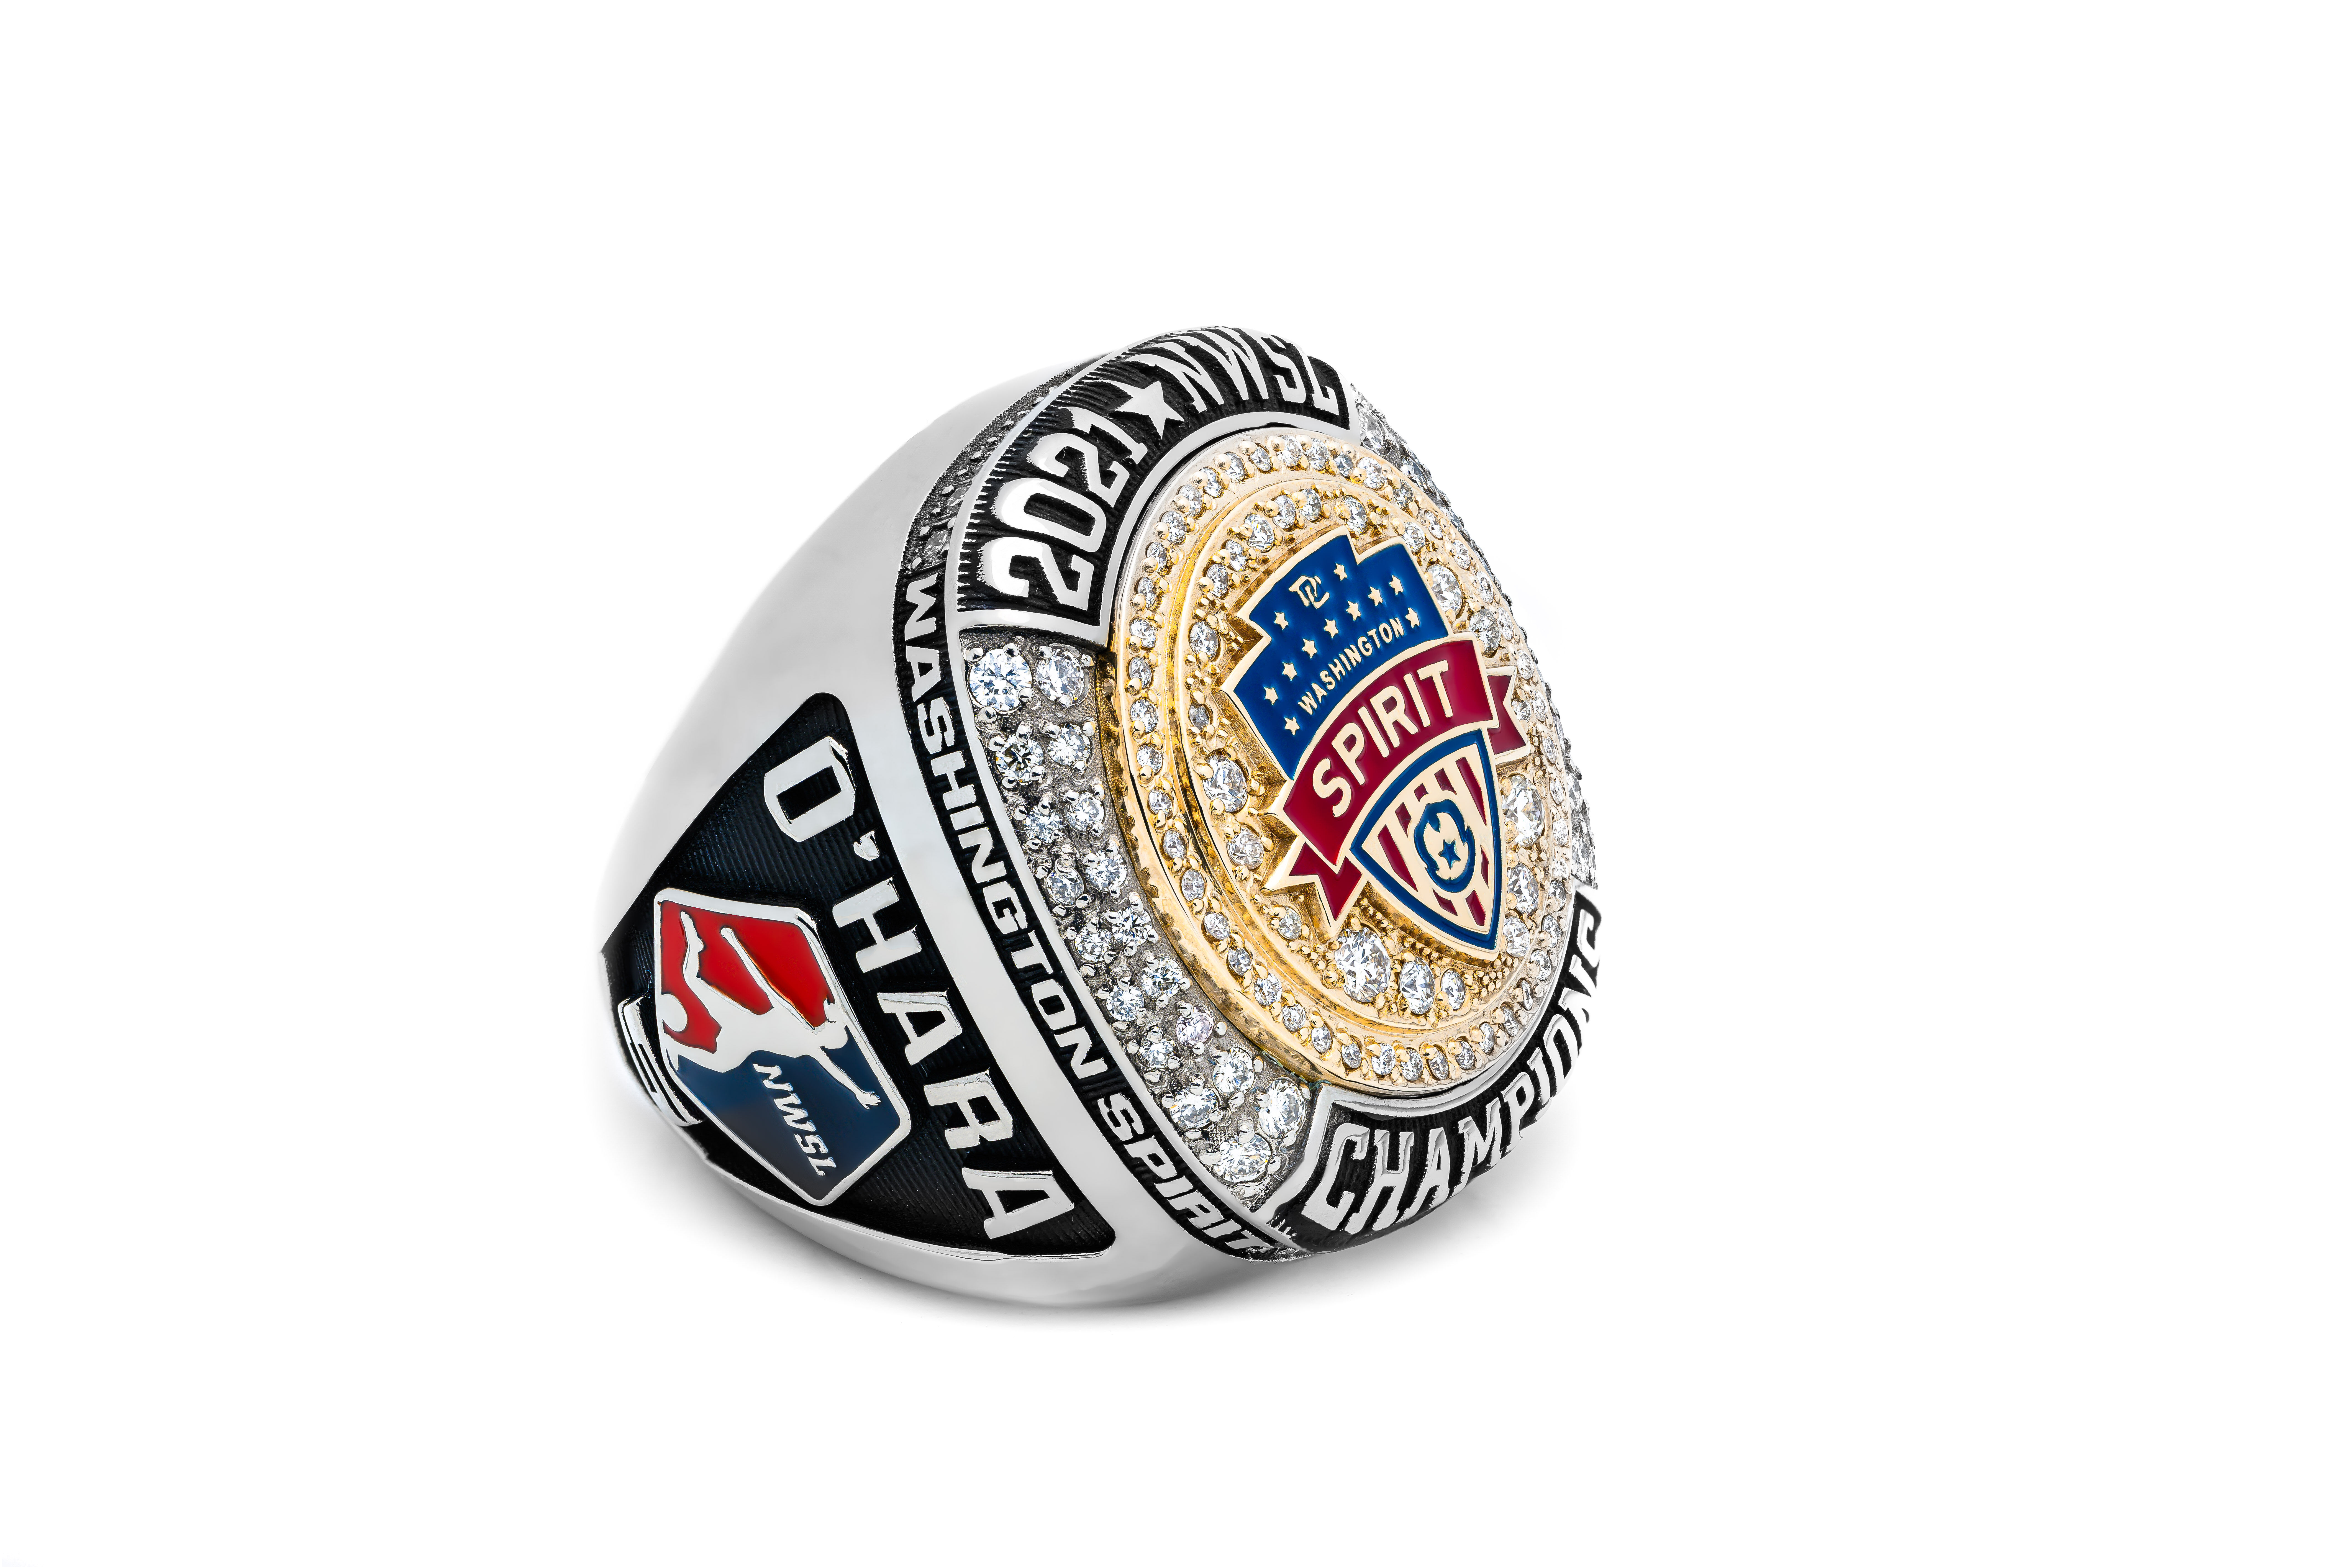 FULL 2022 National League Championship ring ceremony for the